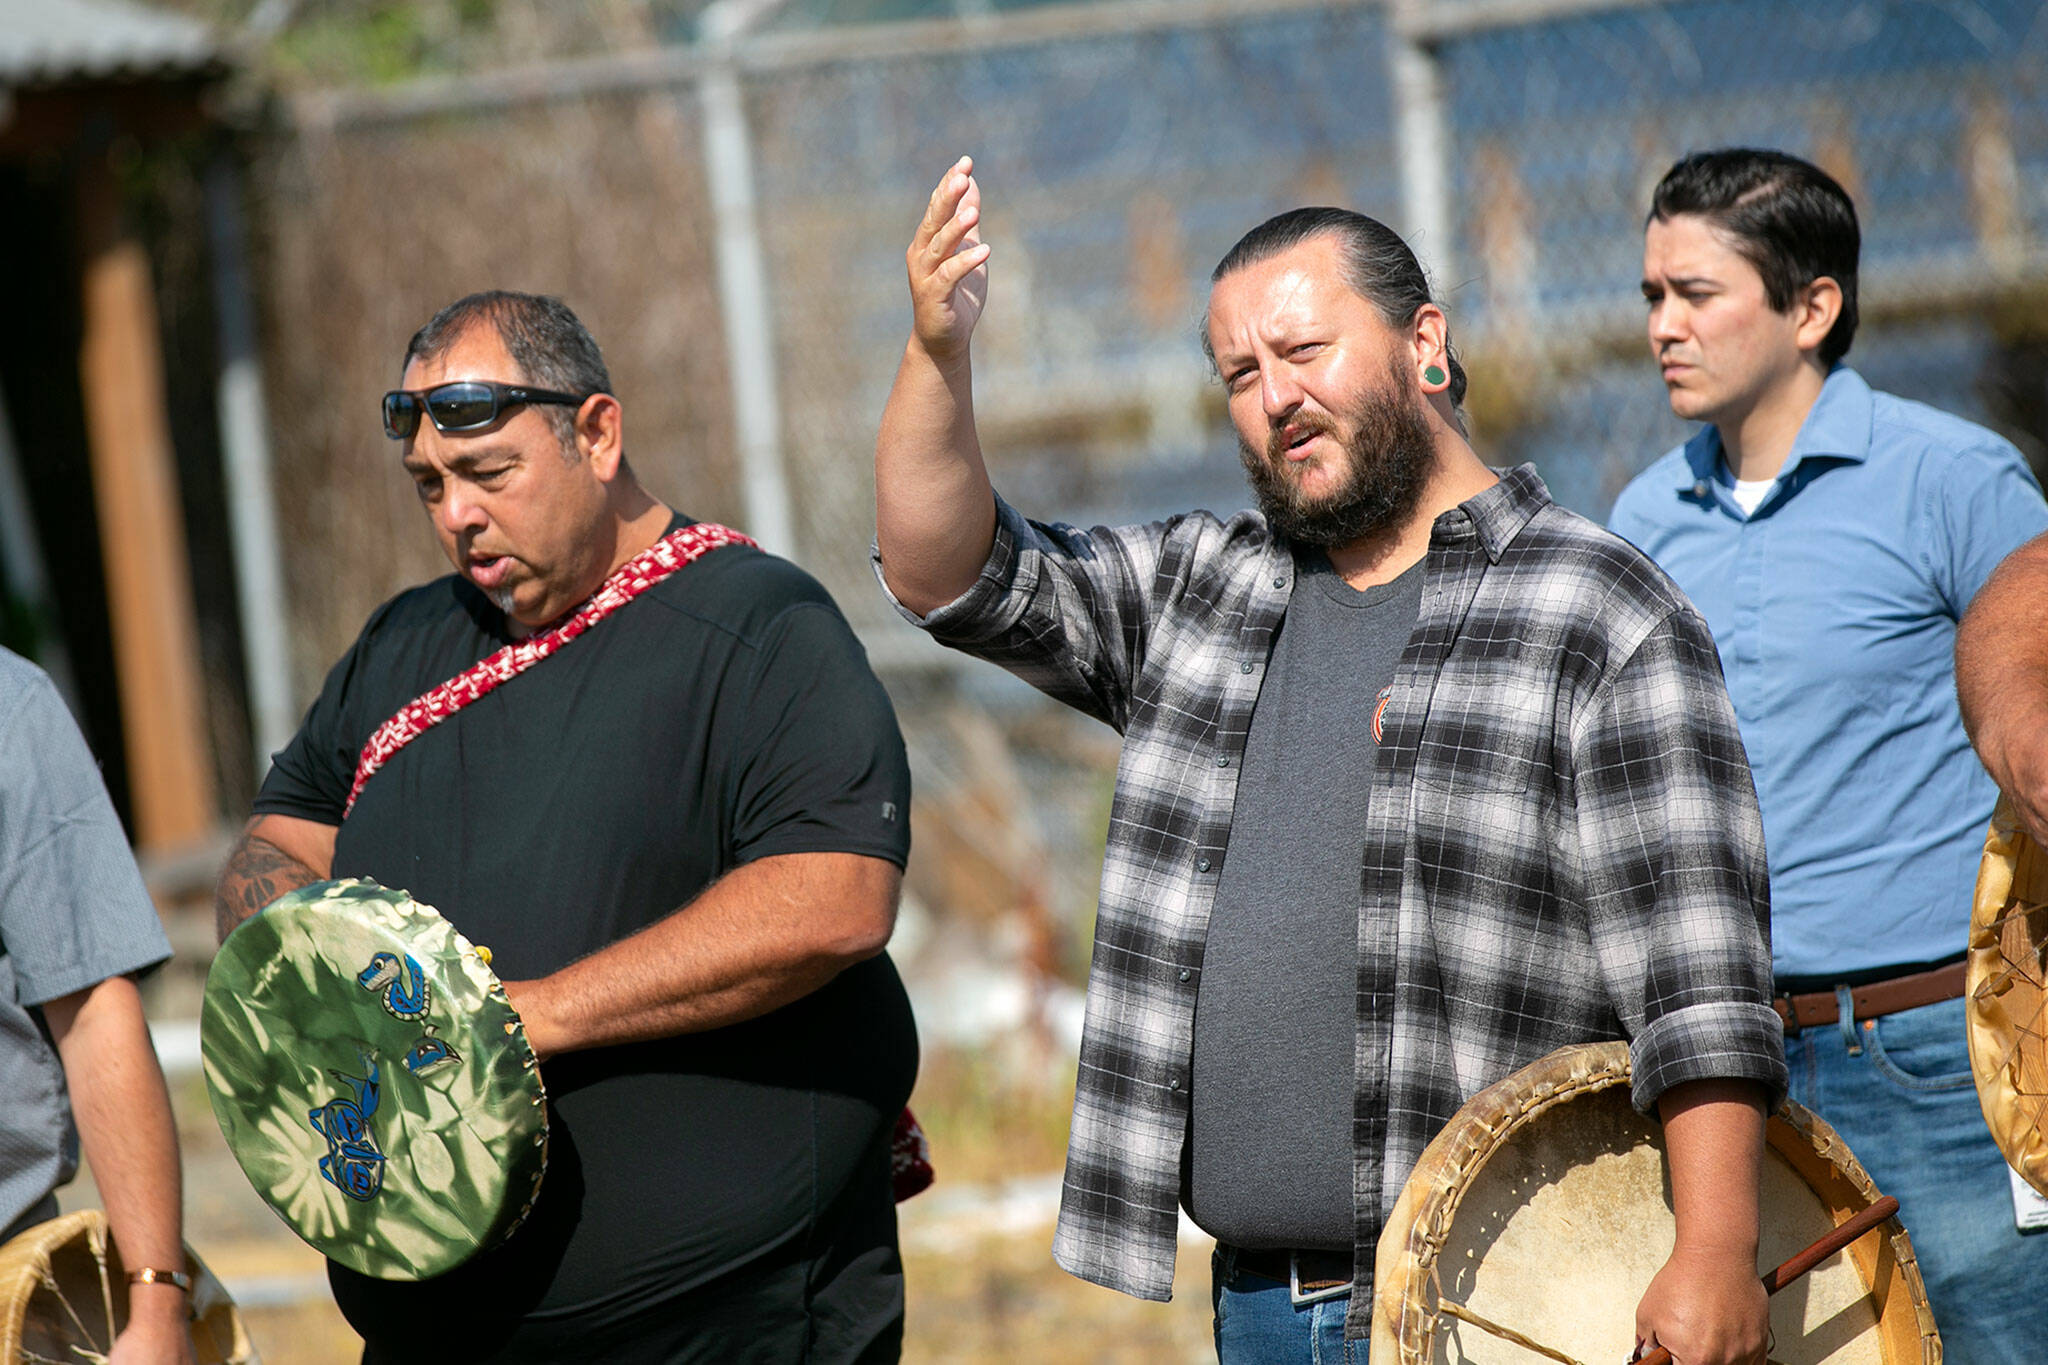 Andrew Gobin of the Tulalip Tribes greets members of NOAA before the playing of a welcoming song during a blessing ceremony Monday, at the decommissioned NOAA building on the waterfront in Mukilteo. (Ryan Berry / The Herald)